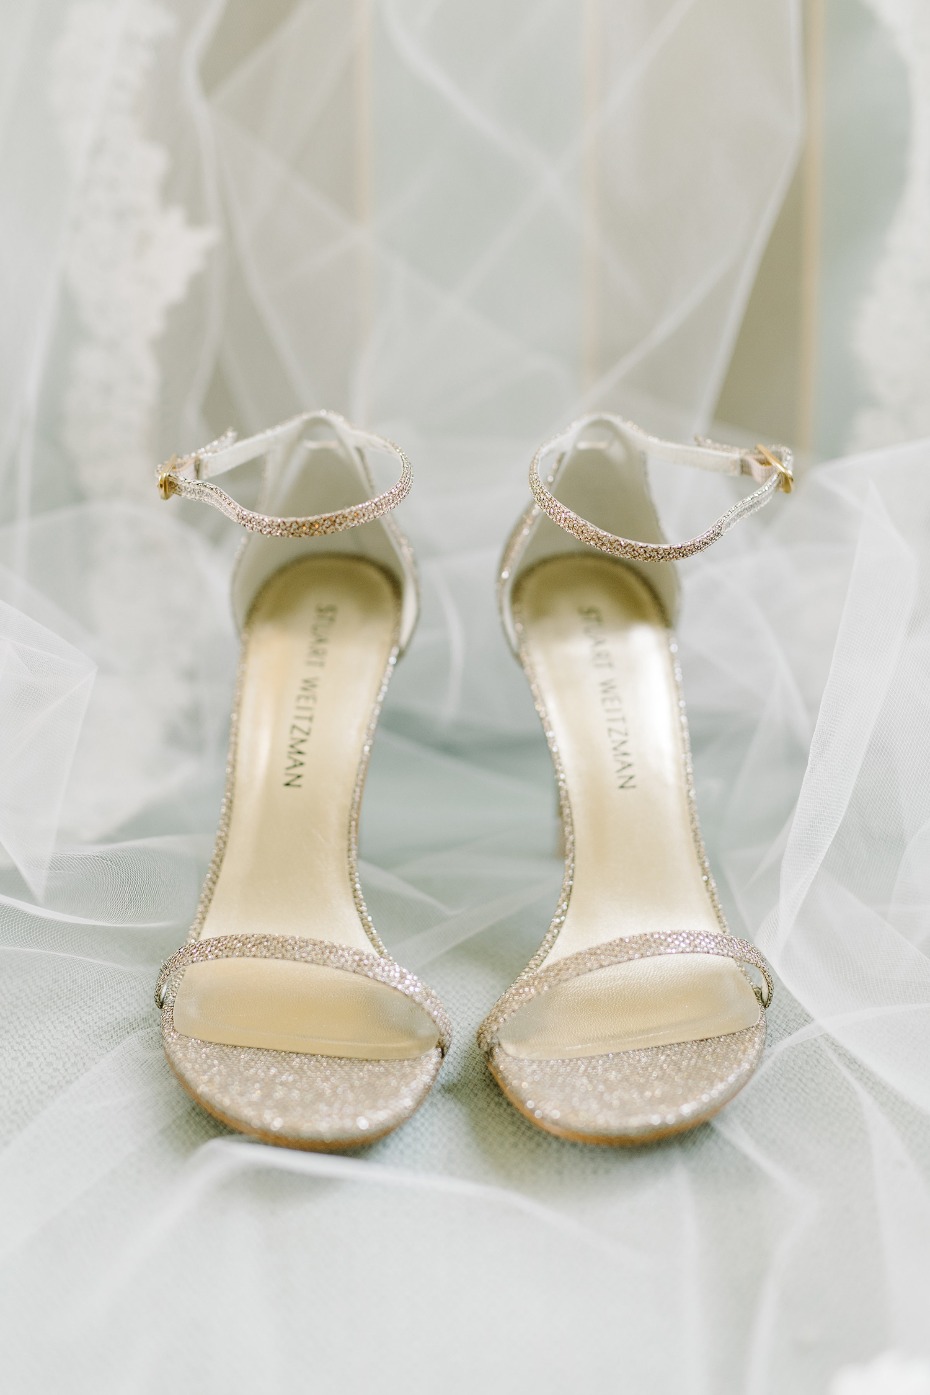 Sparkly gold heels for the bride